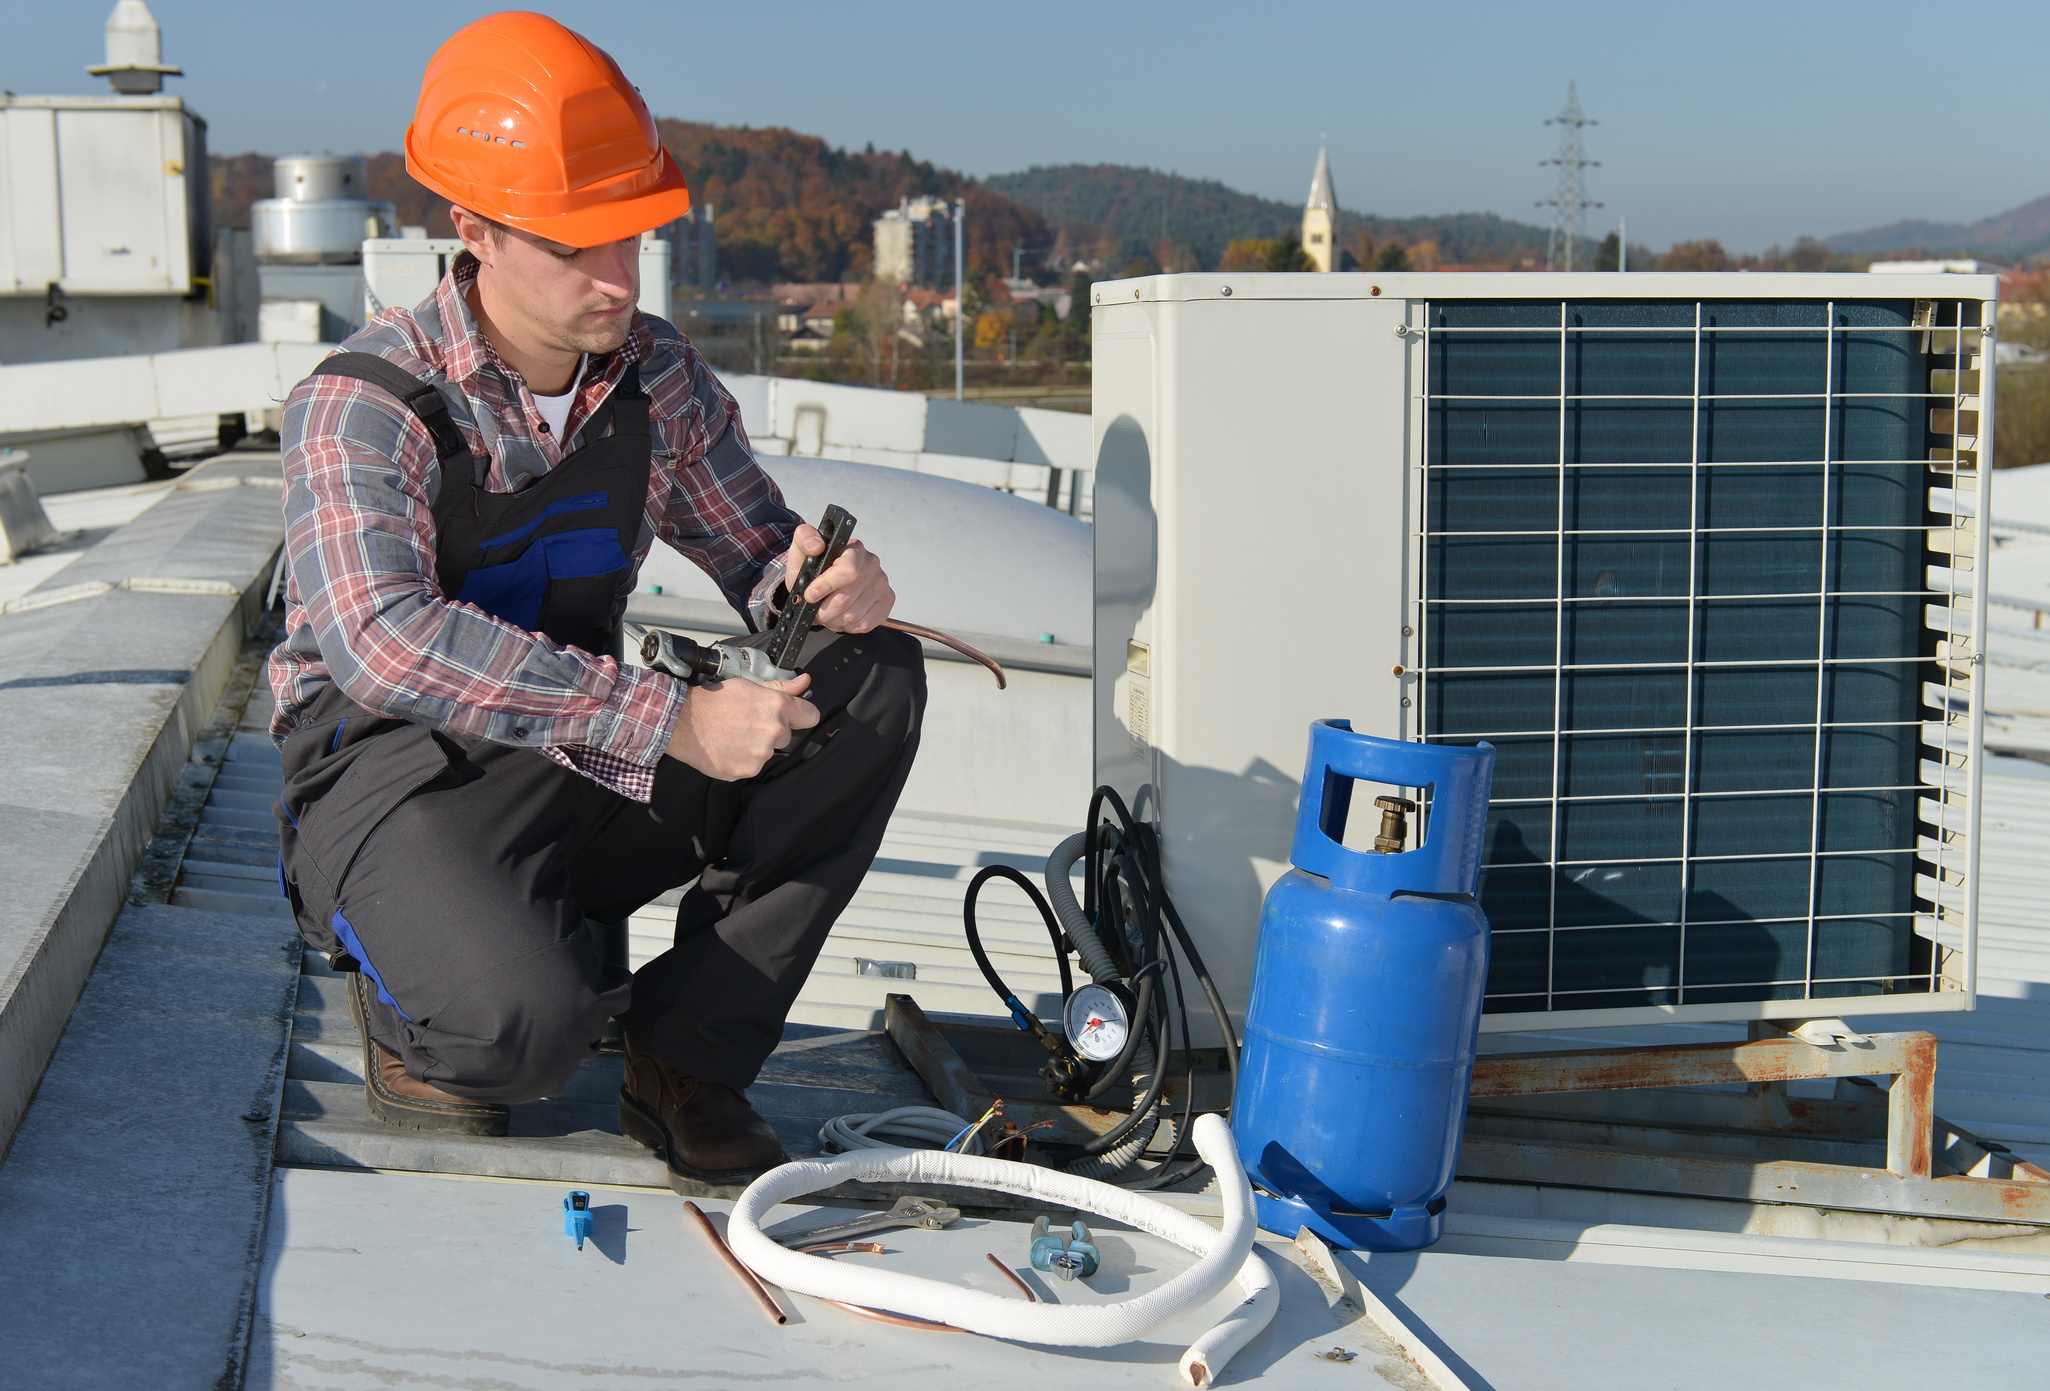 Professional Air Conditioning Repair in Charleston, SC, Accommodates All Types of Repair Jobs